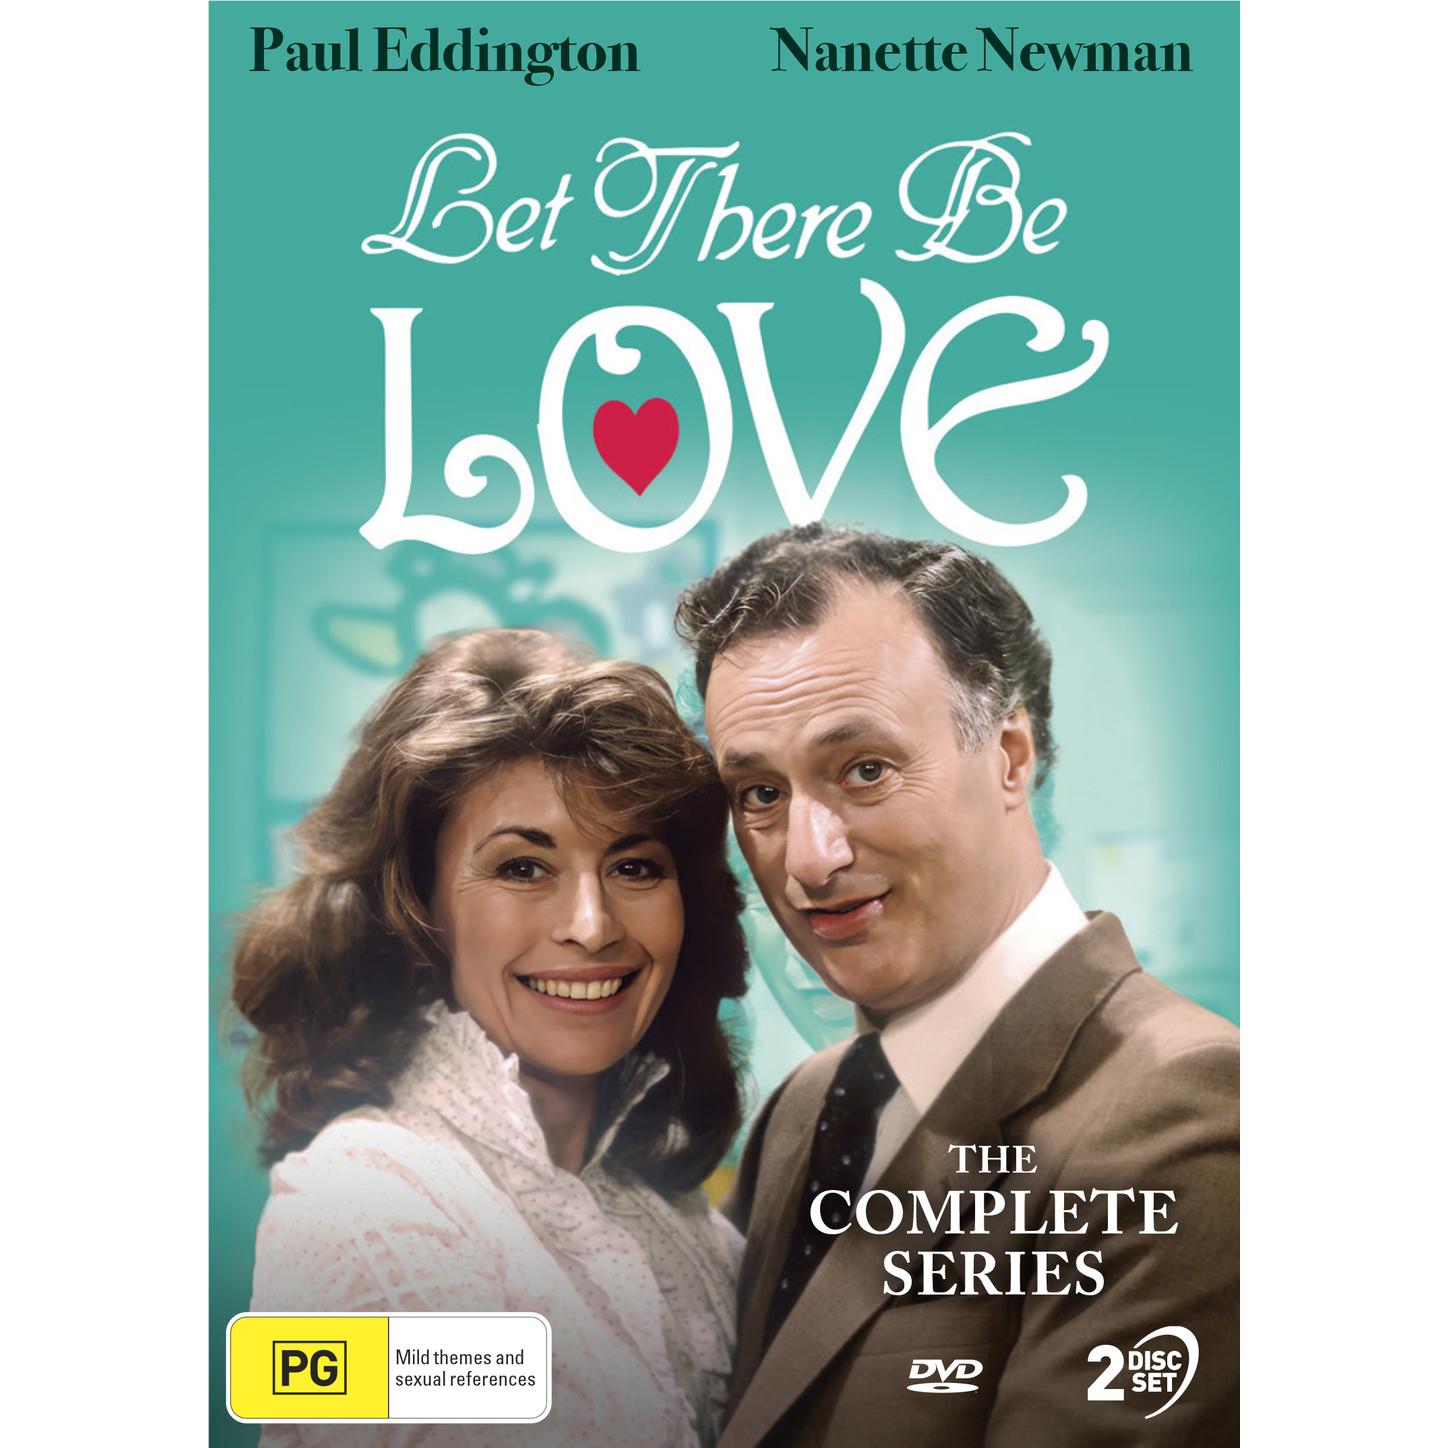 let there be love - the complete series